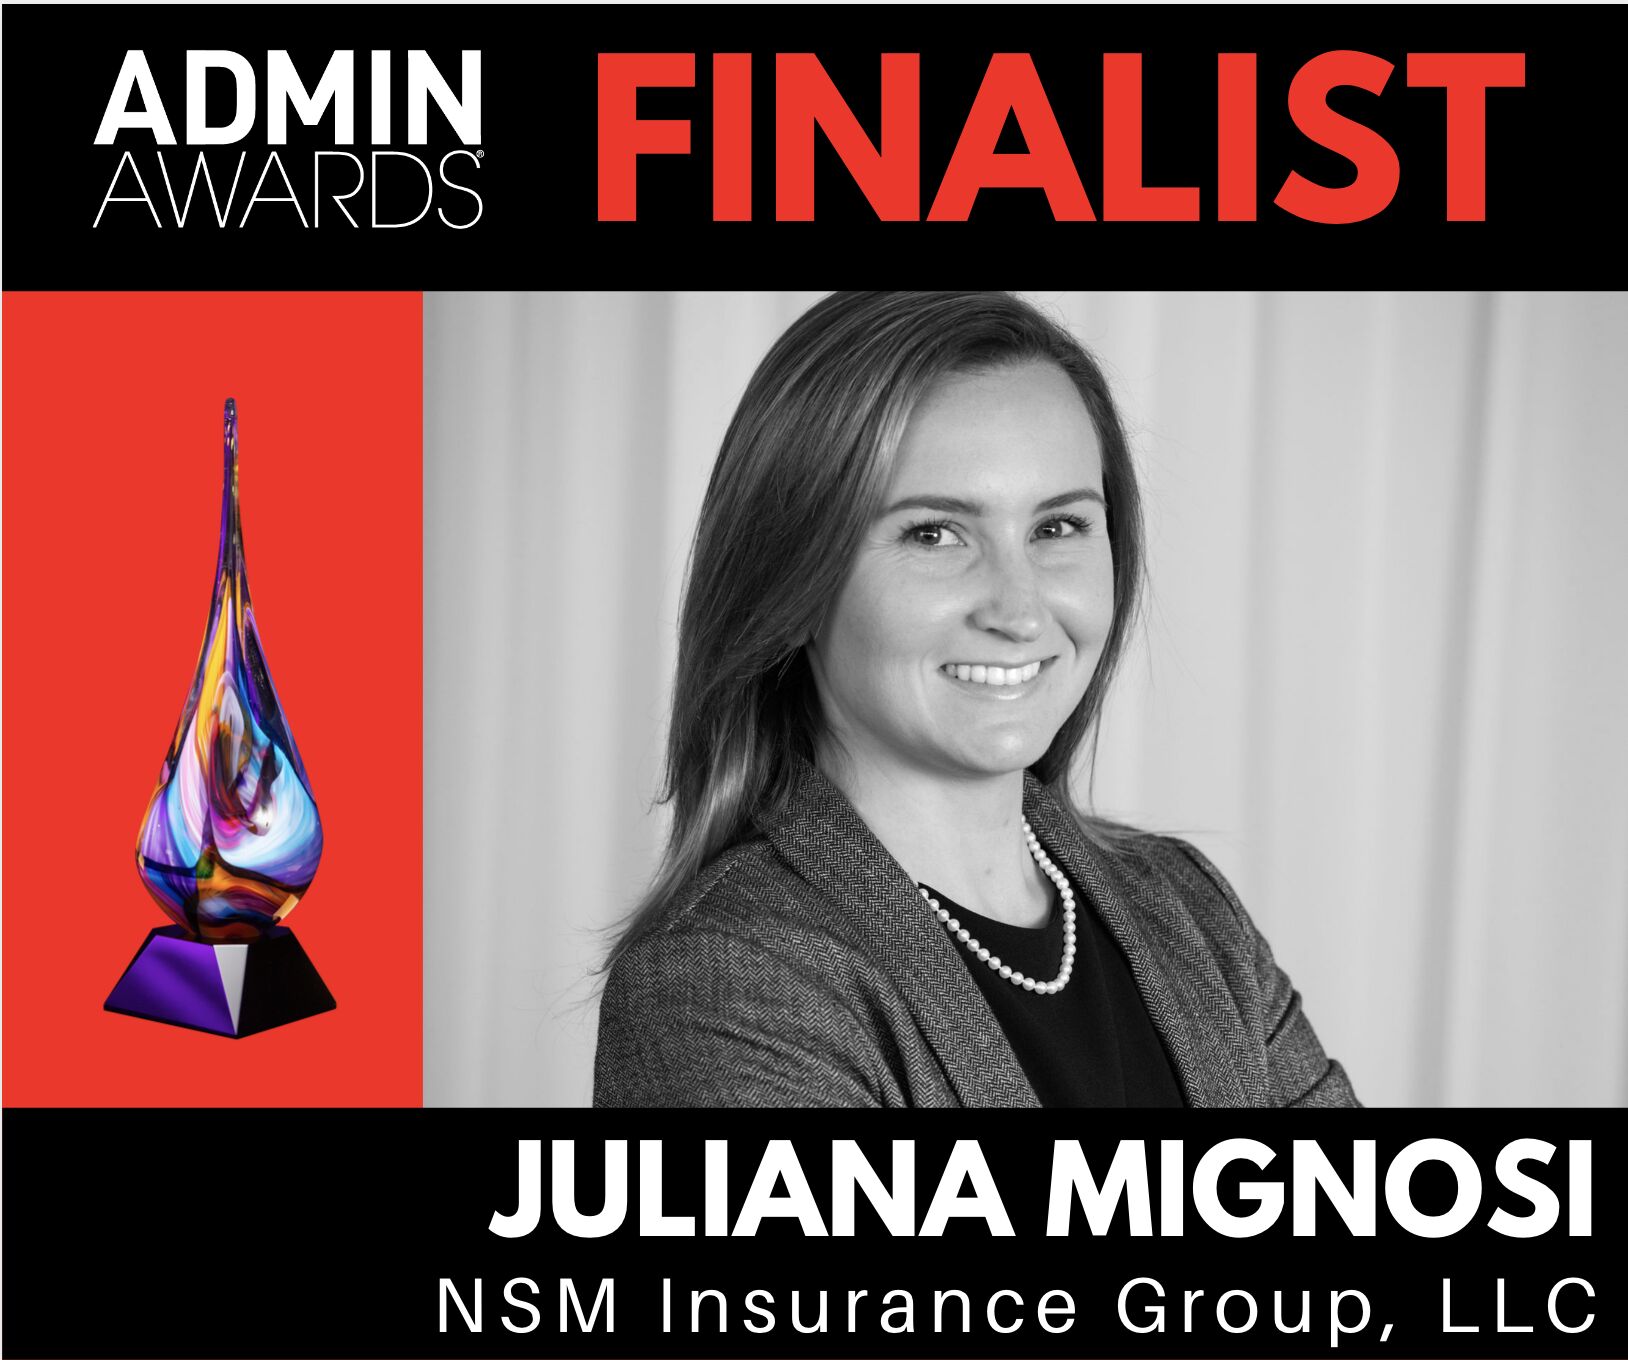 Headshot of Juliana Mignosi with the text Admin Awards Finalist and an image of the award statue in a red color block